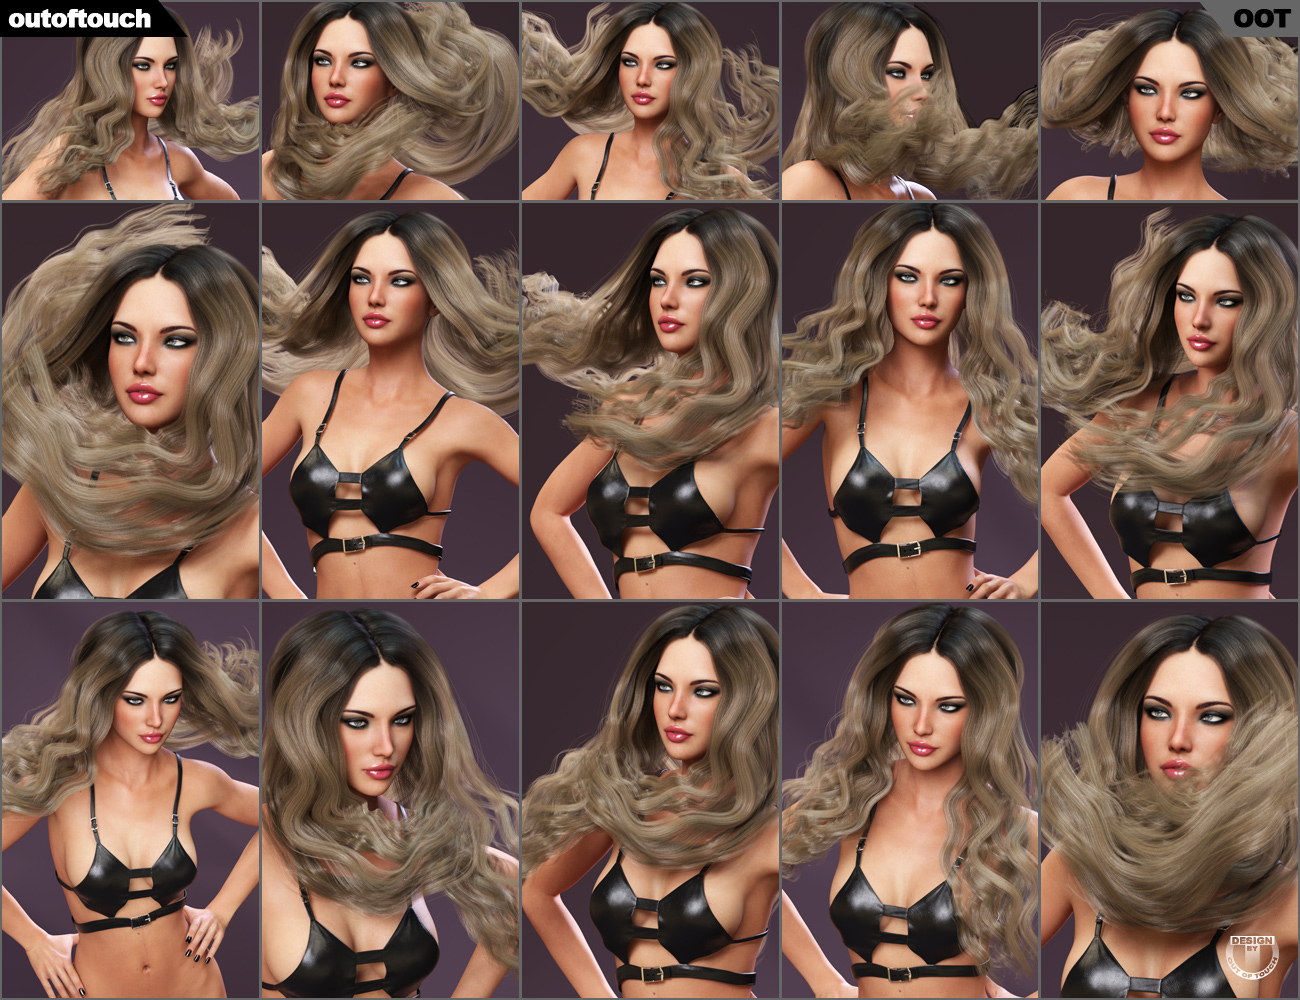 Jazmine Hair by: outoftouch, 3D Models by Daz 3D